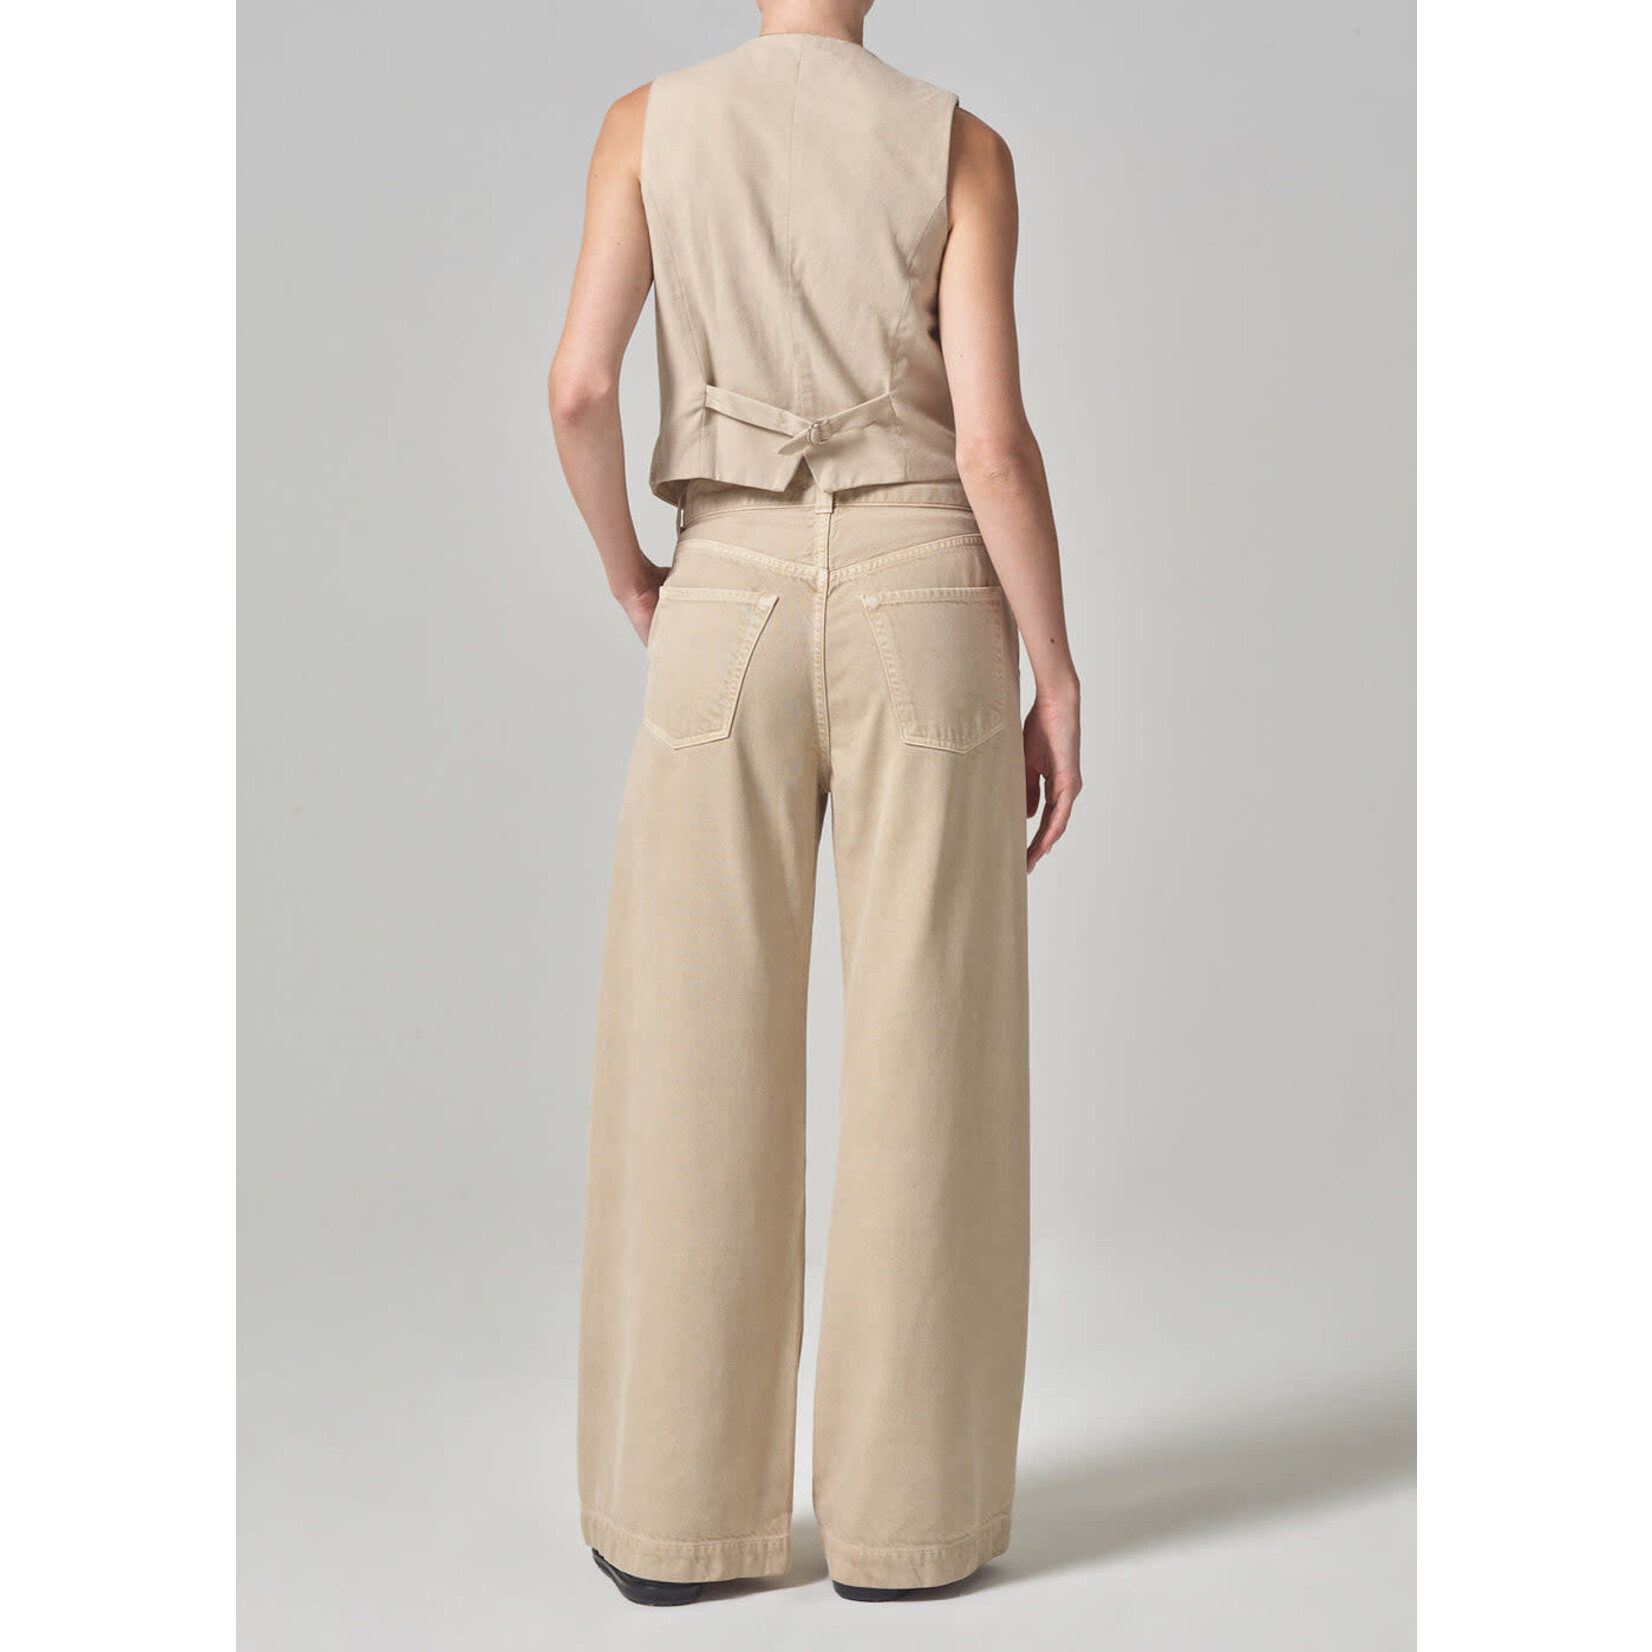 Citizens of Humanity Beverly Trouser